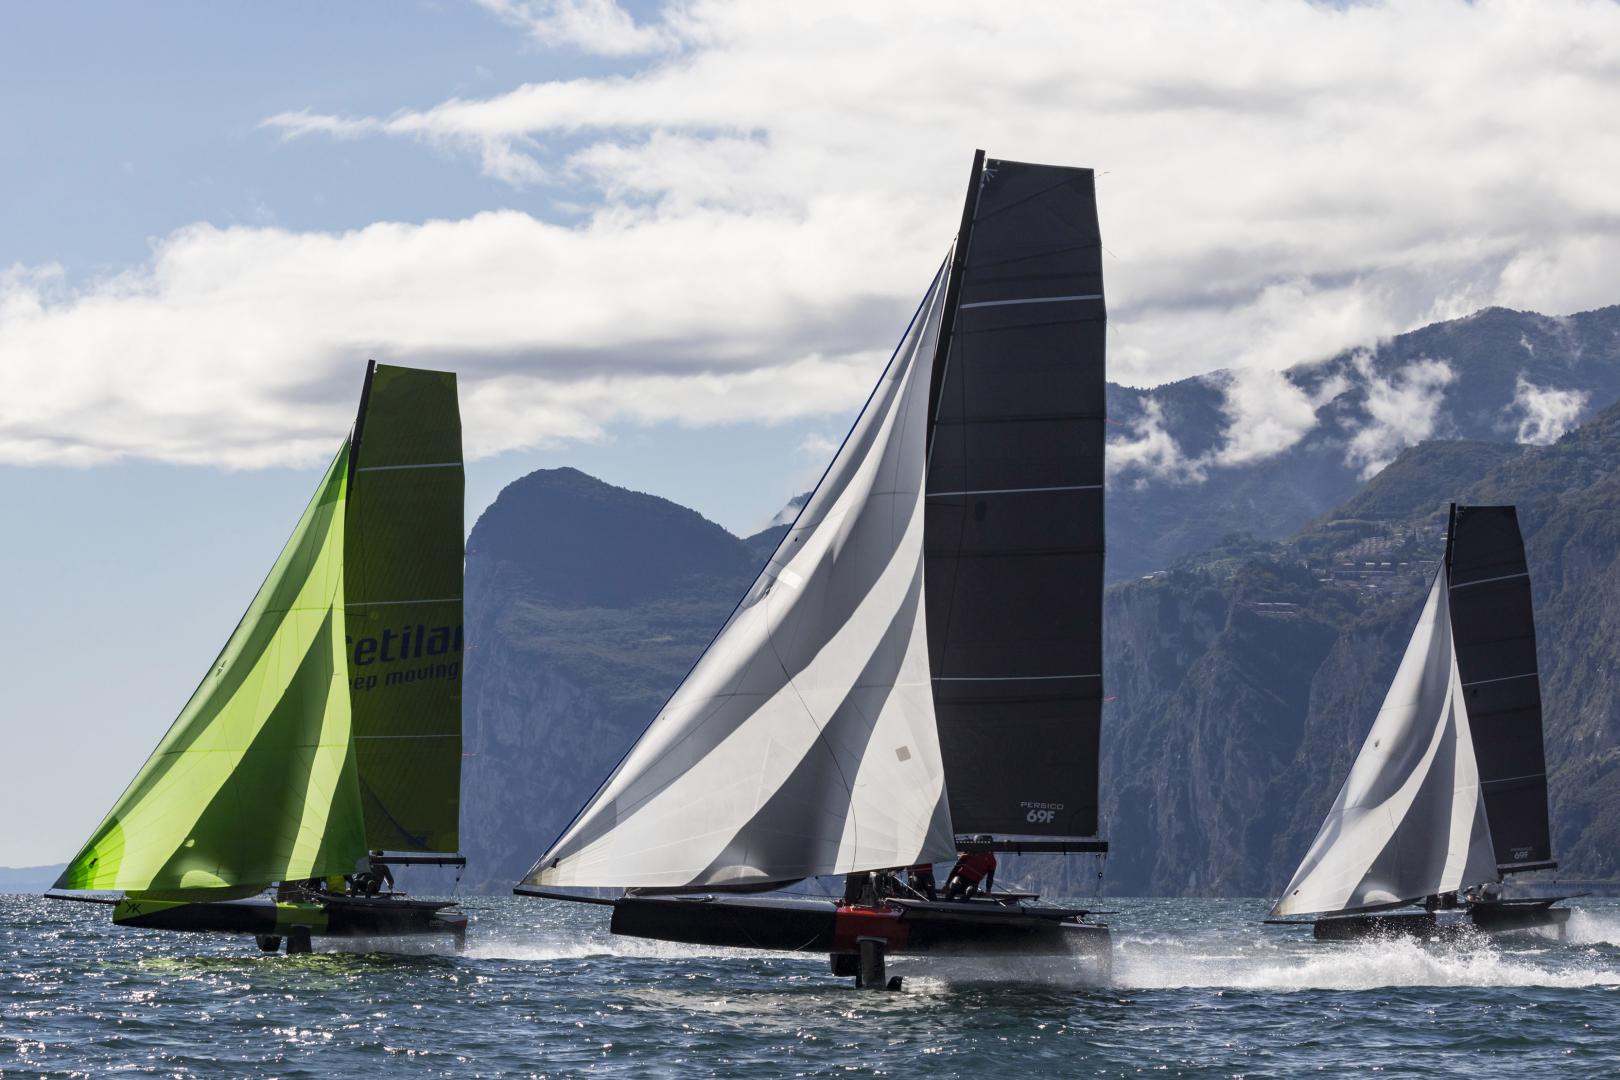 A new beginning for the 69F Youth Foiling Gold Cup